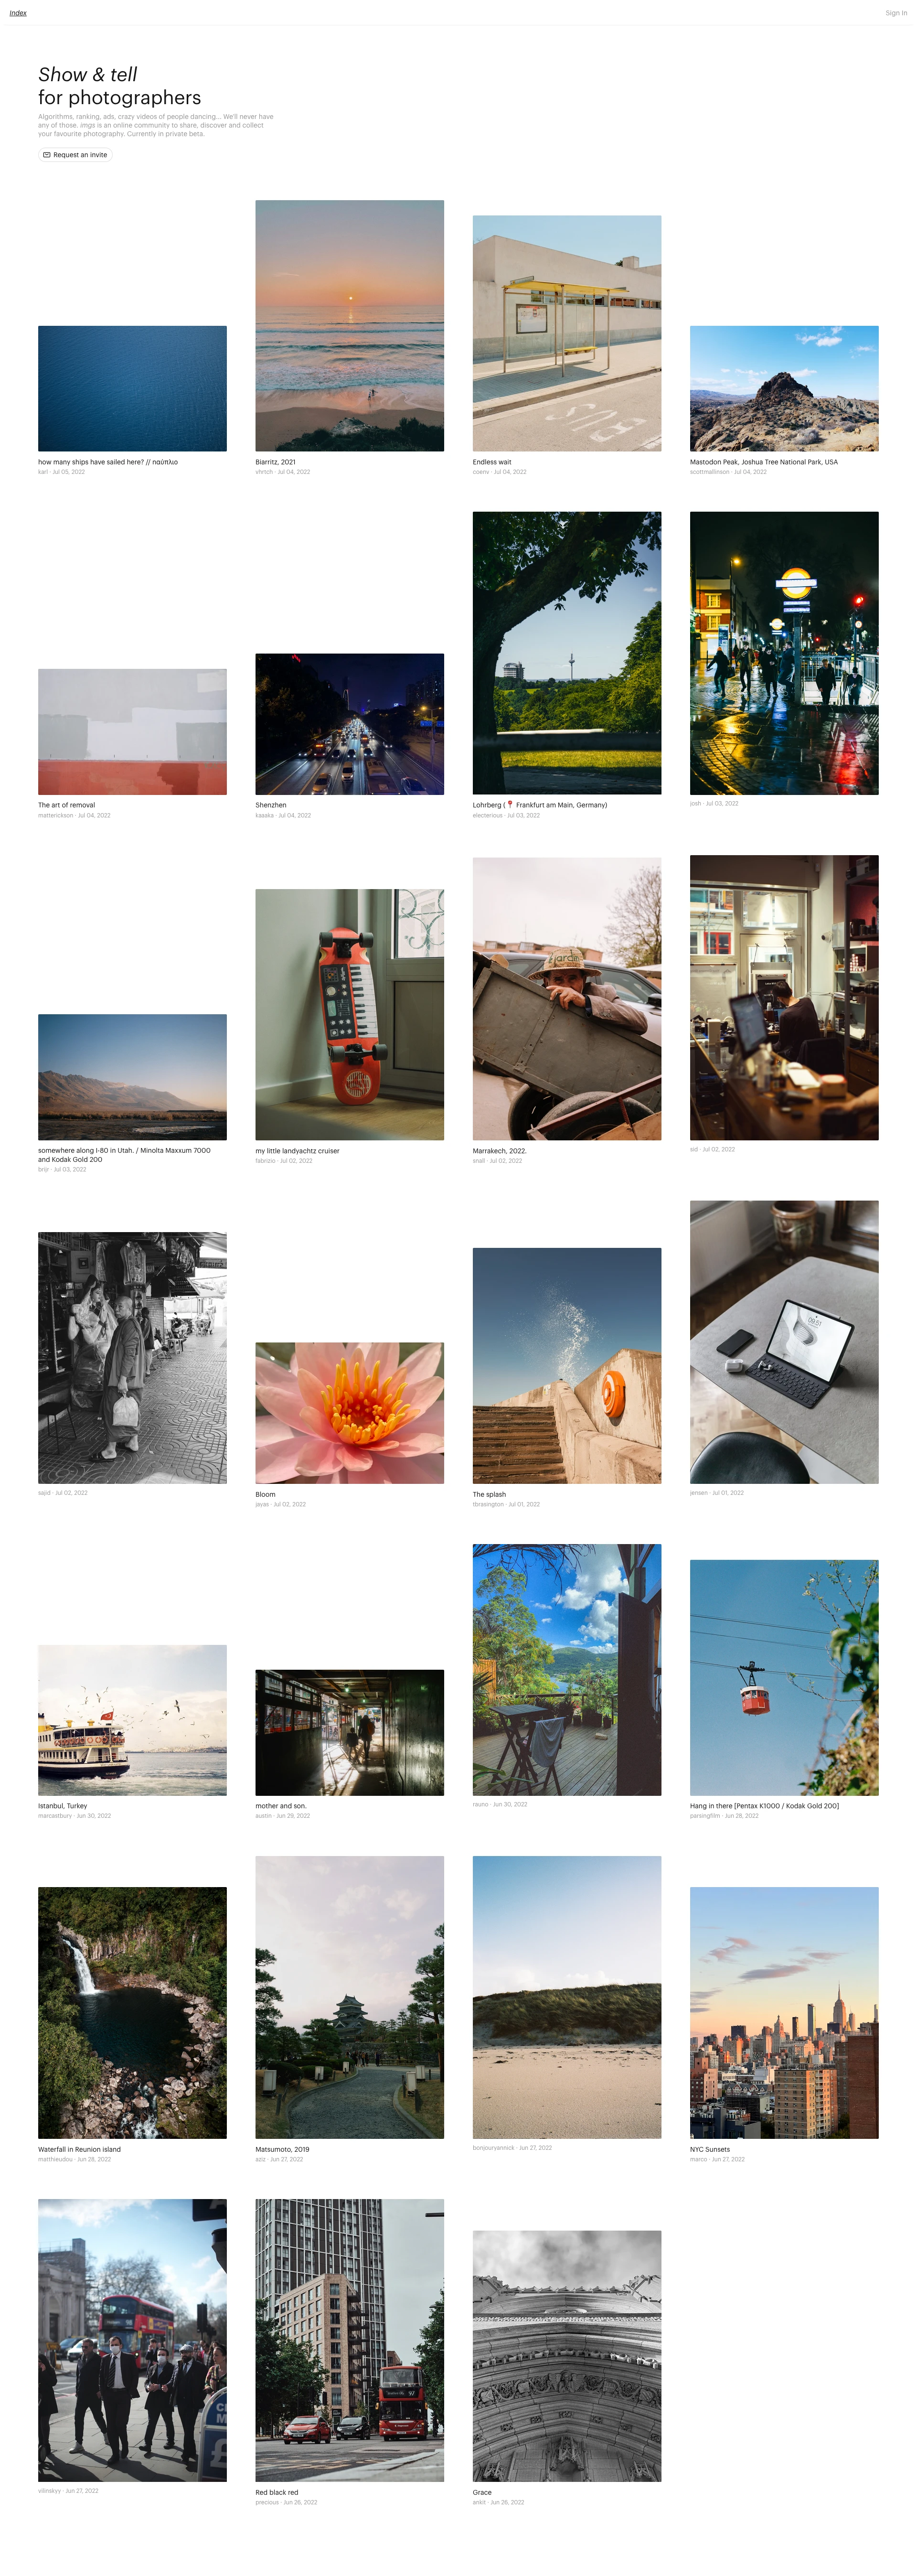 imgs.so Landing Page Example: An online community to share, discover and collect your favourite photography.